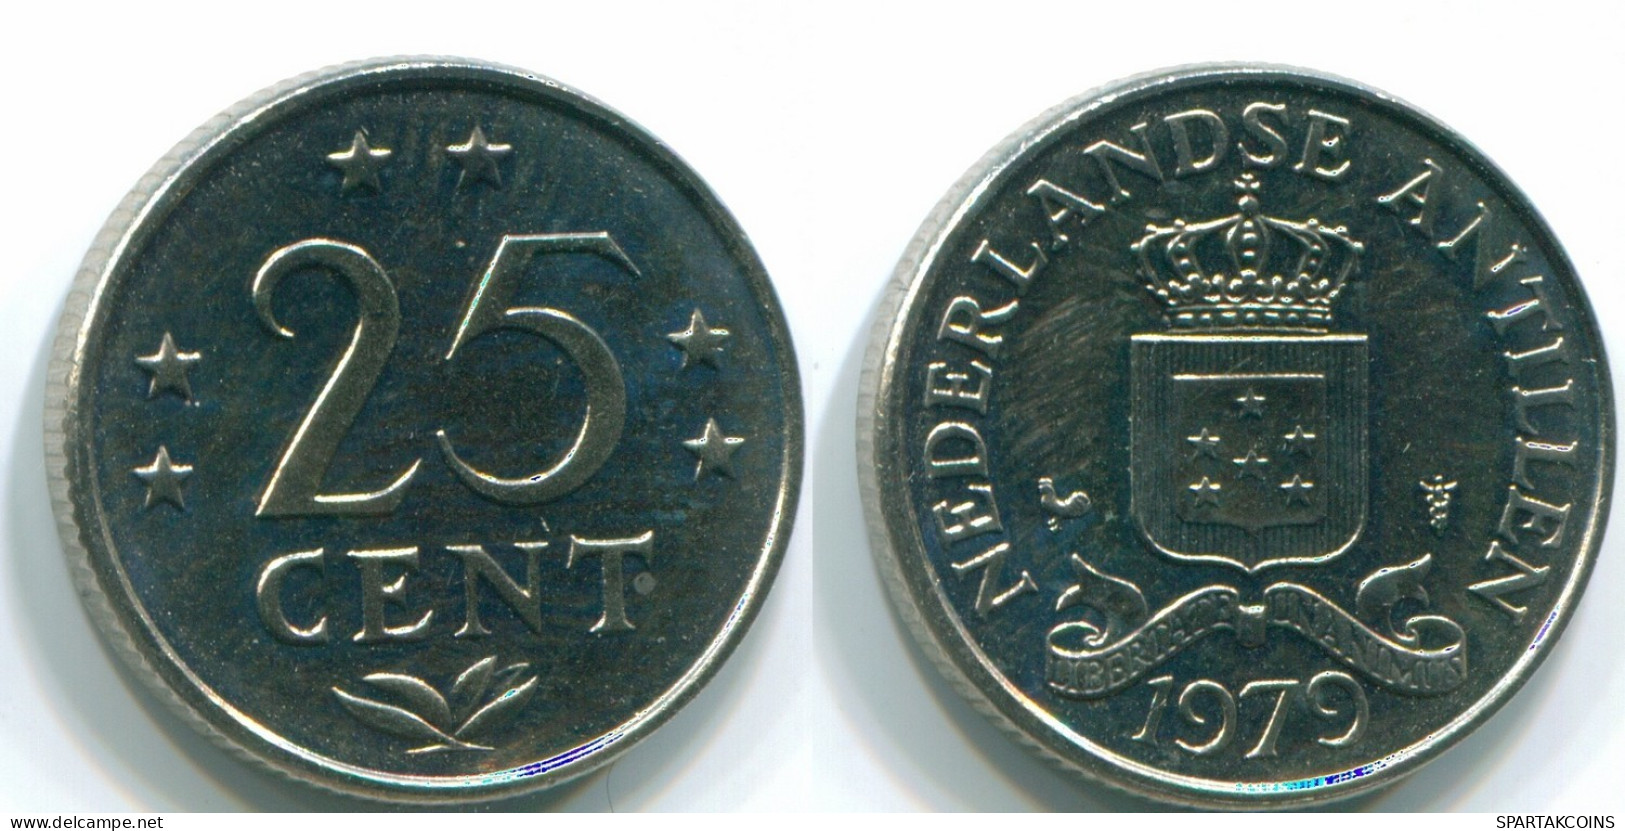 25 CENTS 1979 NETHERLANDS ANTILLES Nickel Colonial Coin #S11651.U.A - Netherlands Antilles